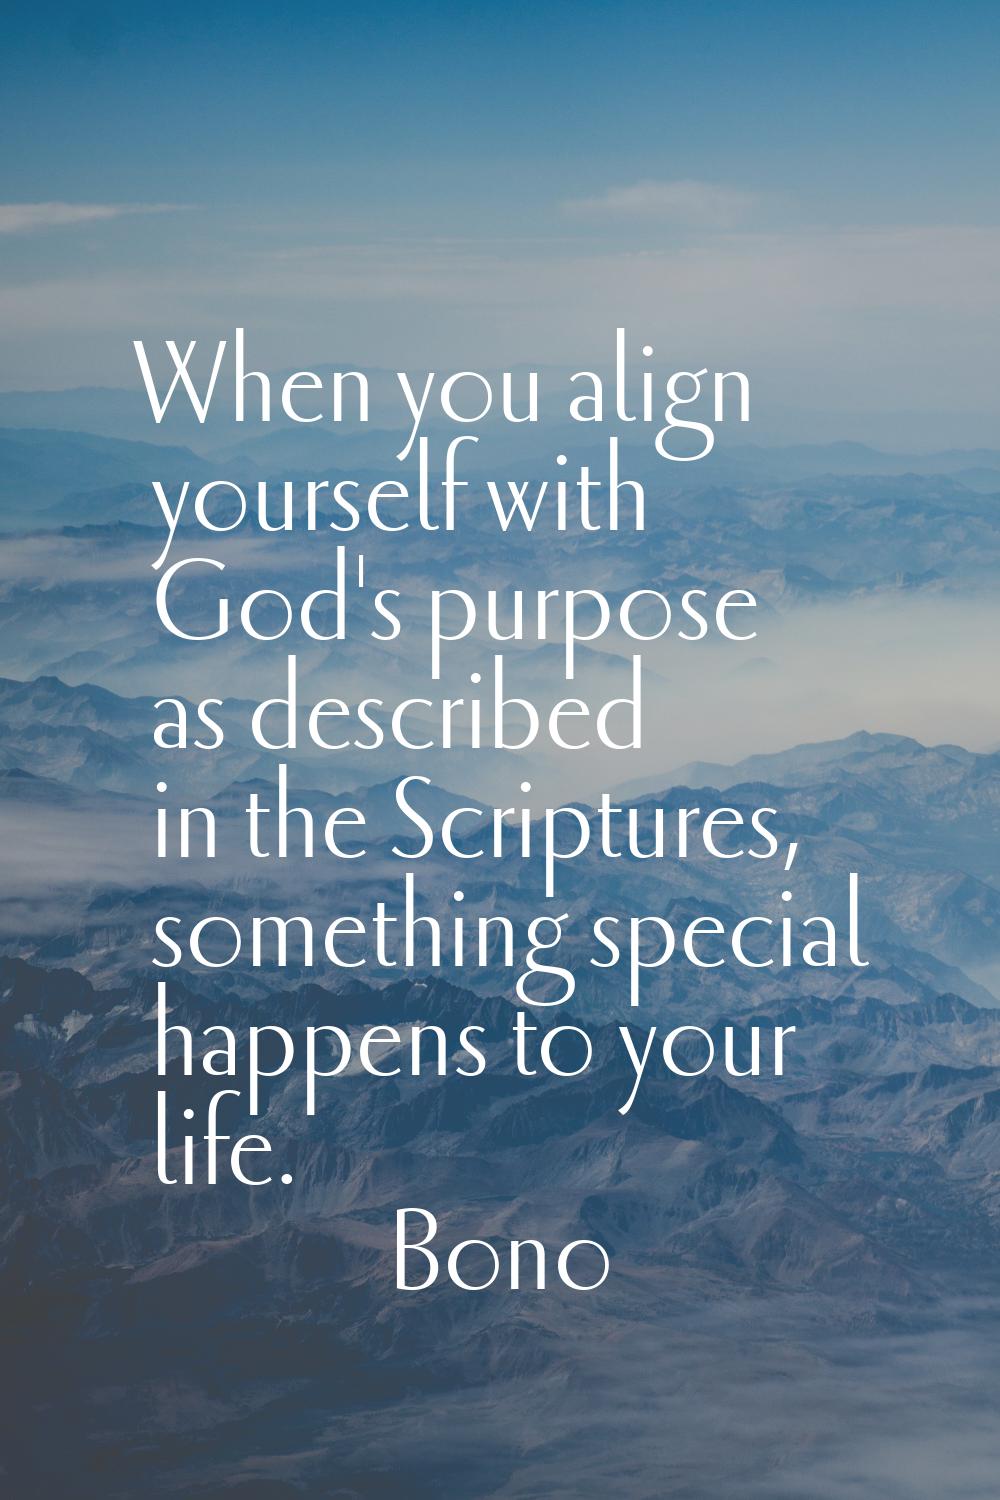 When you align yourself with God's purpose as described in the Scriptures, something special happen